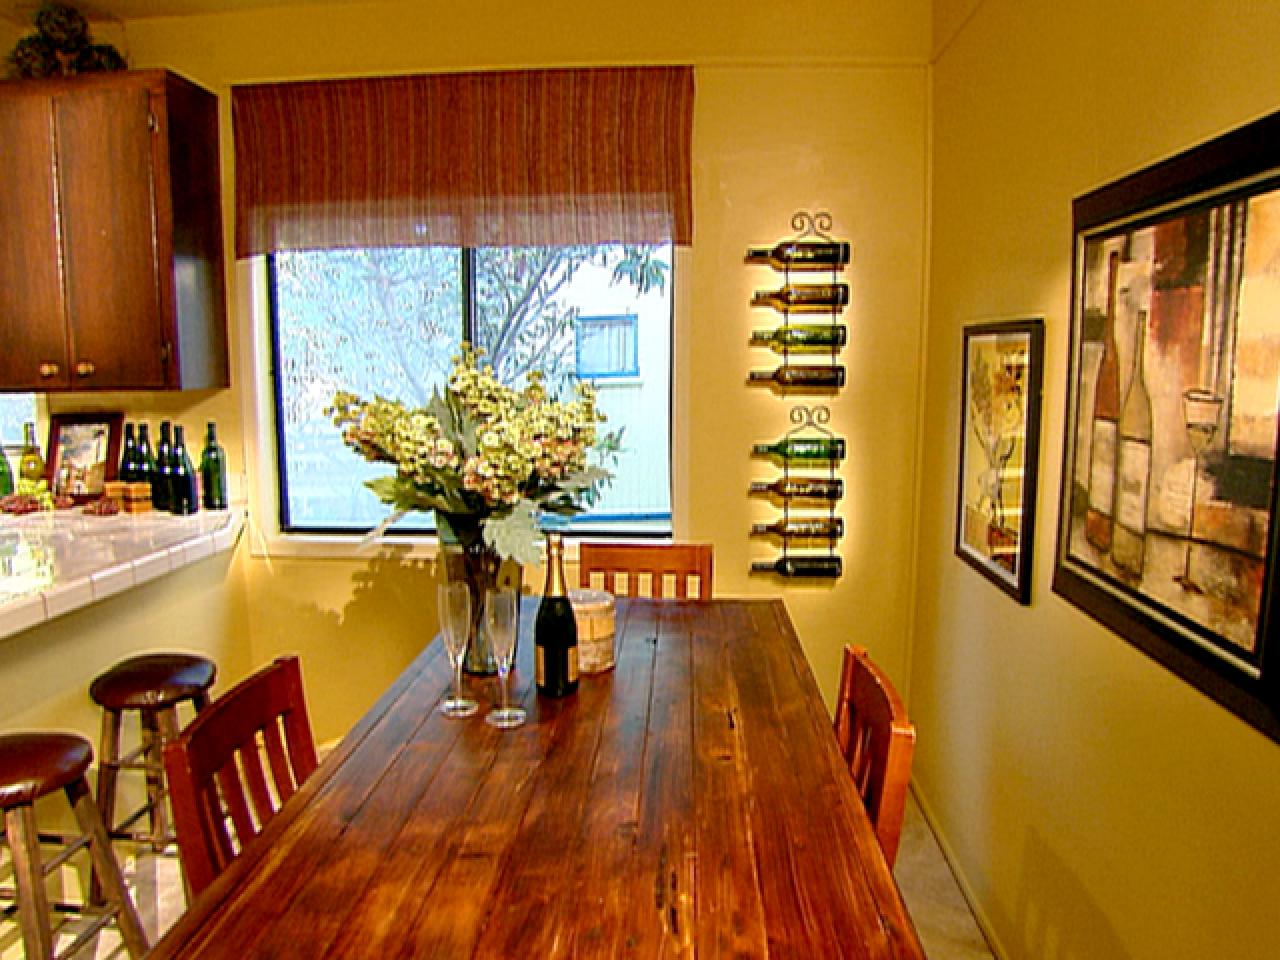 Wine Themed Kitchen Pours On The Charm, Wine Themed Kitchen Rug Sets